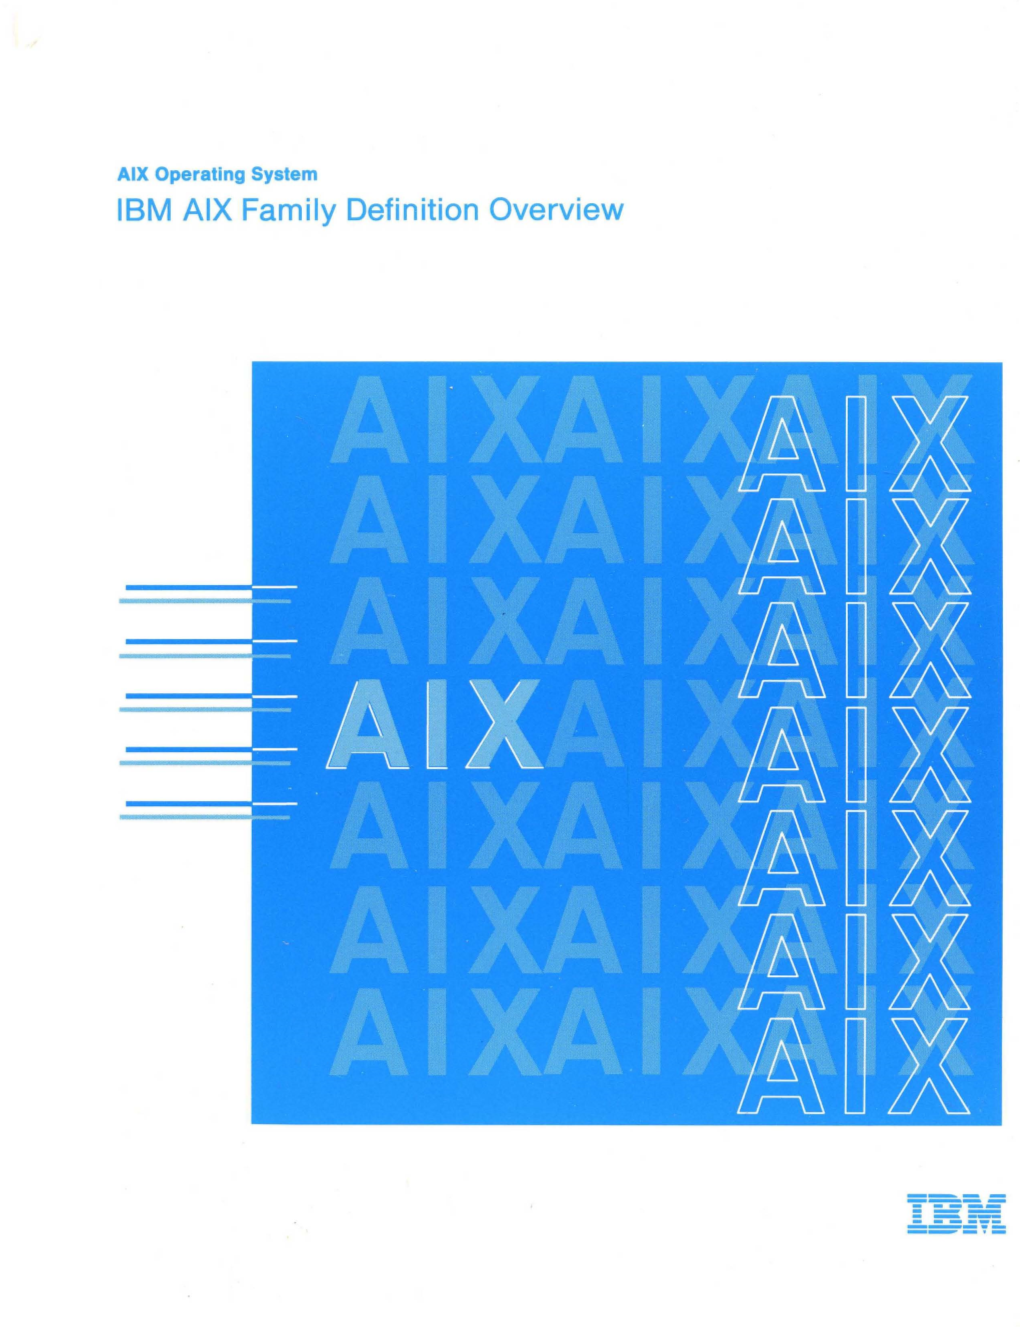 IBM AIX Family Definition Overview